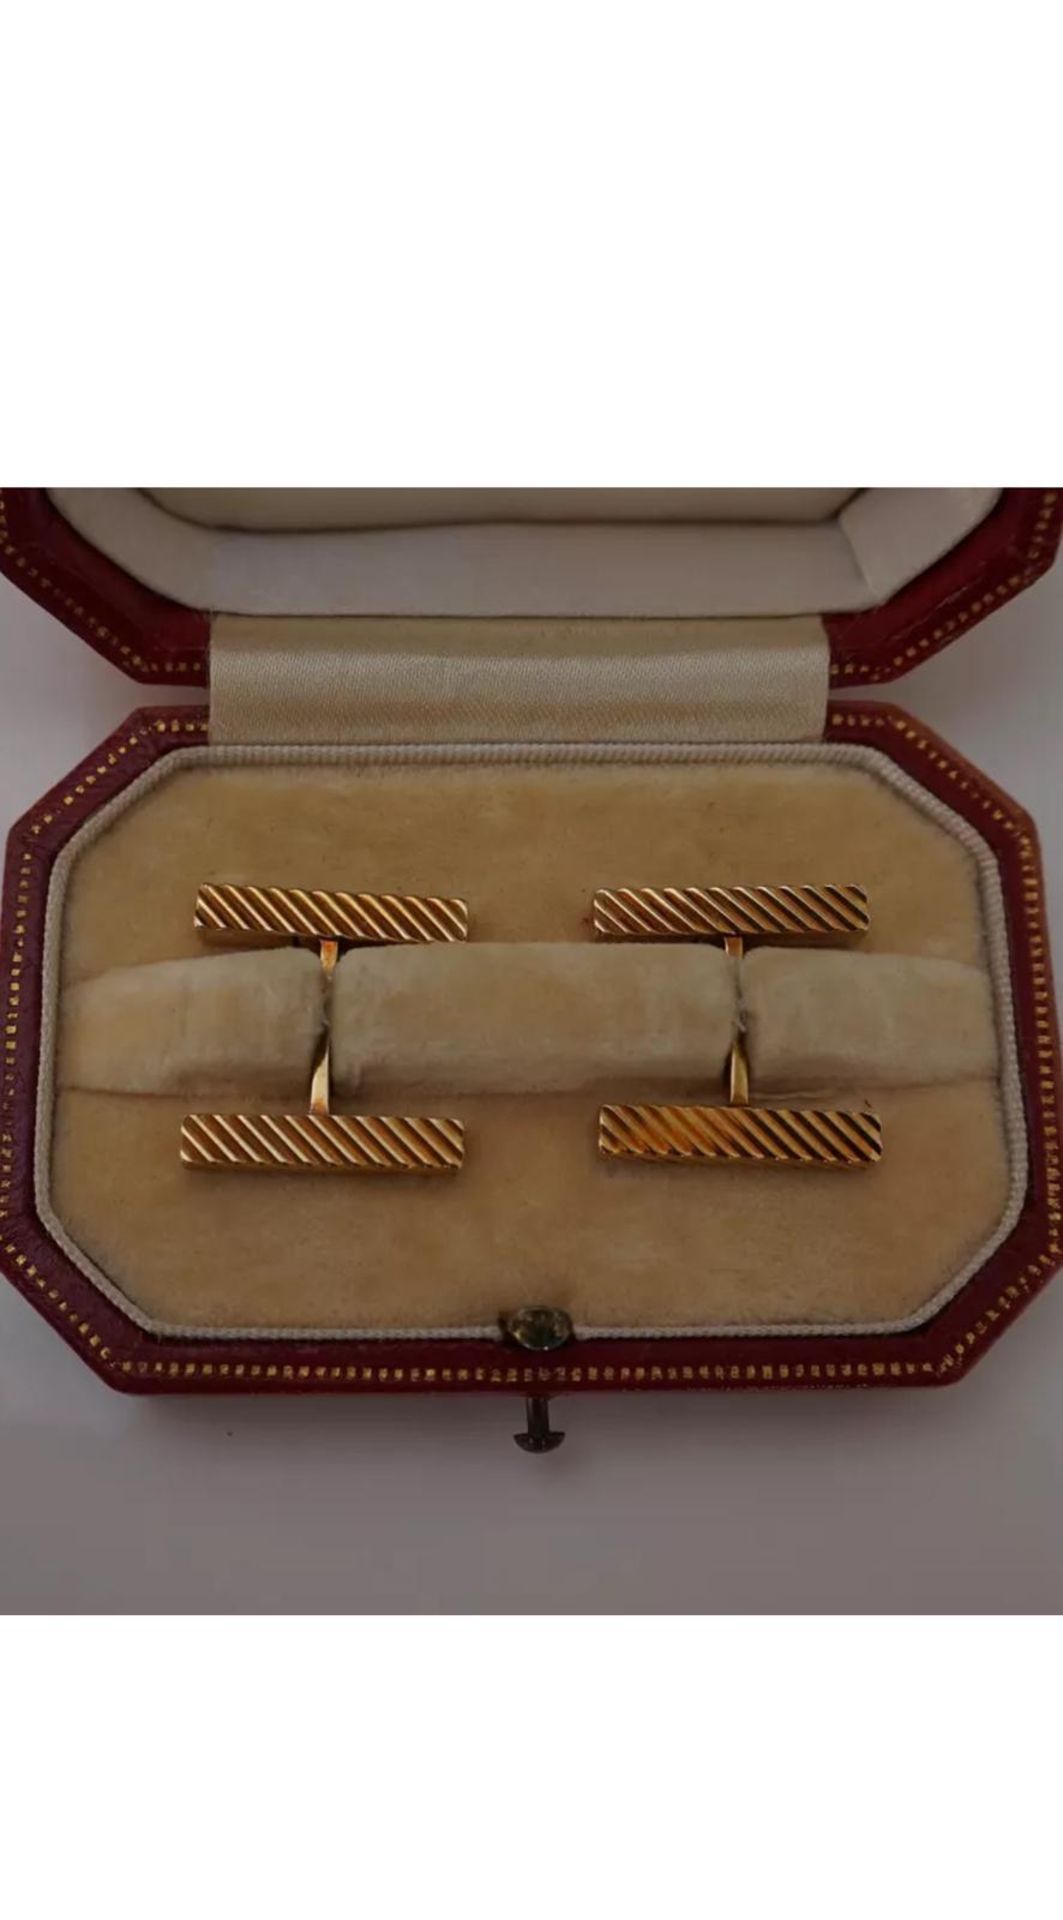 Stunning & Fine Vintage Cartier 18ct Yellow Gold Cuff Links in their Original Cartier Box - Image 3 of 7